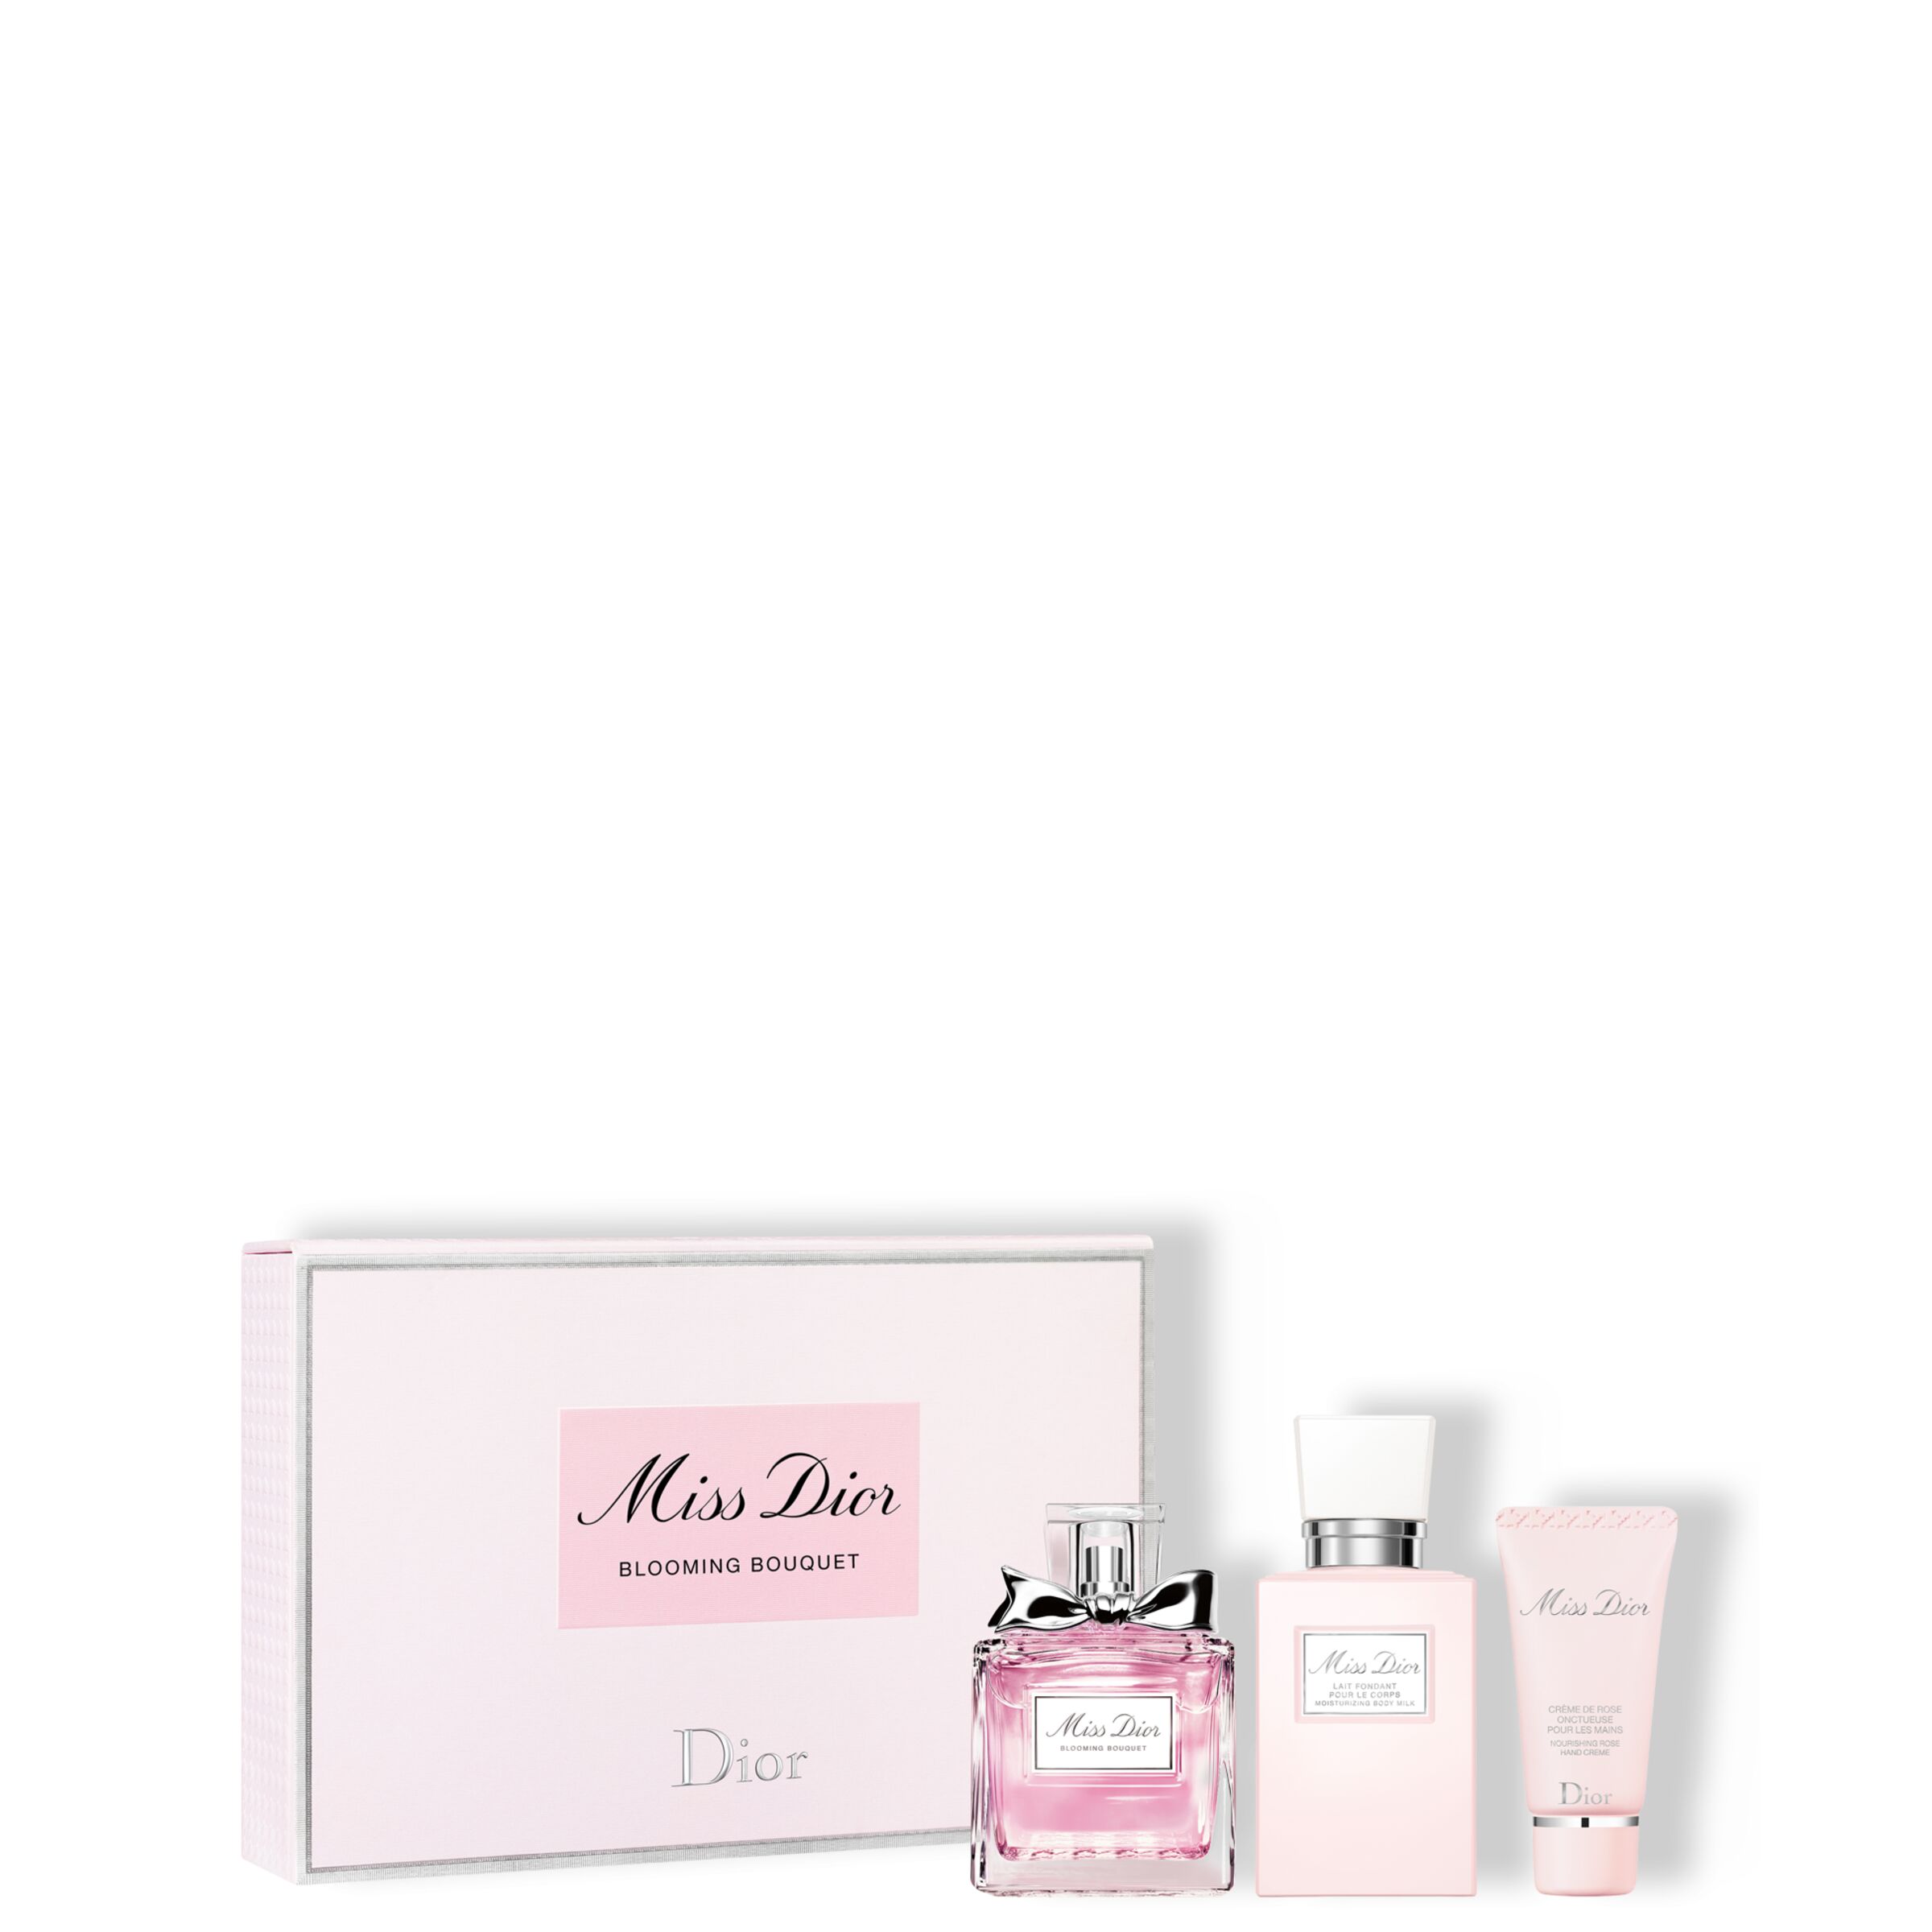 DIOR MISS DIOR BLOOMING BOUQUET GIFT SET  Shopee Malaysia